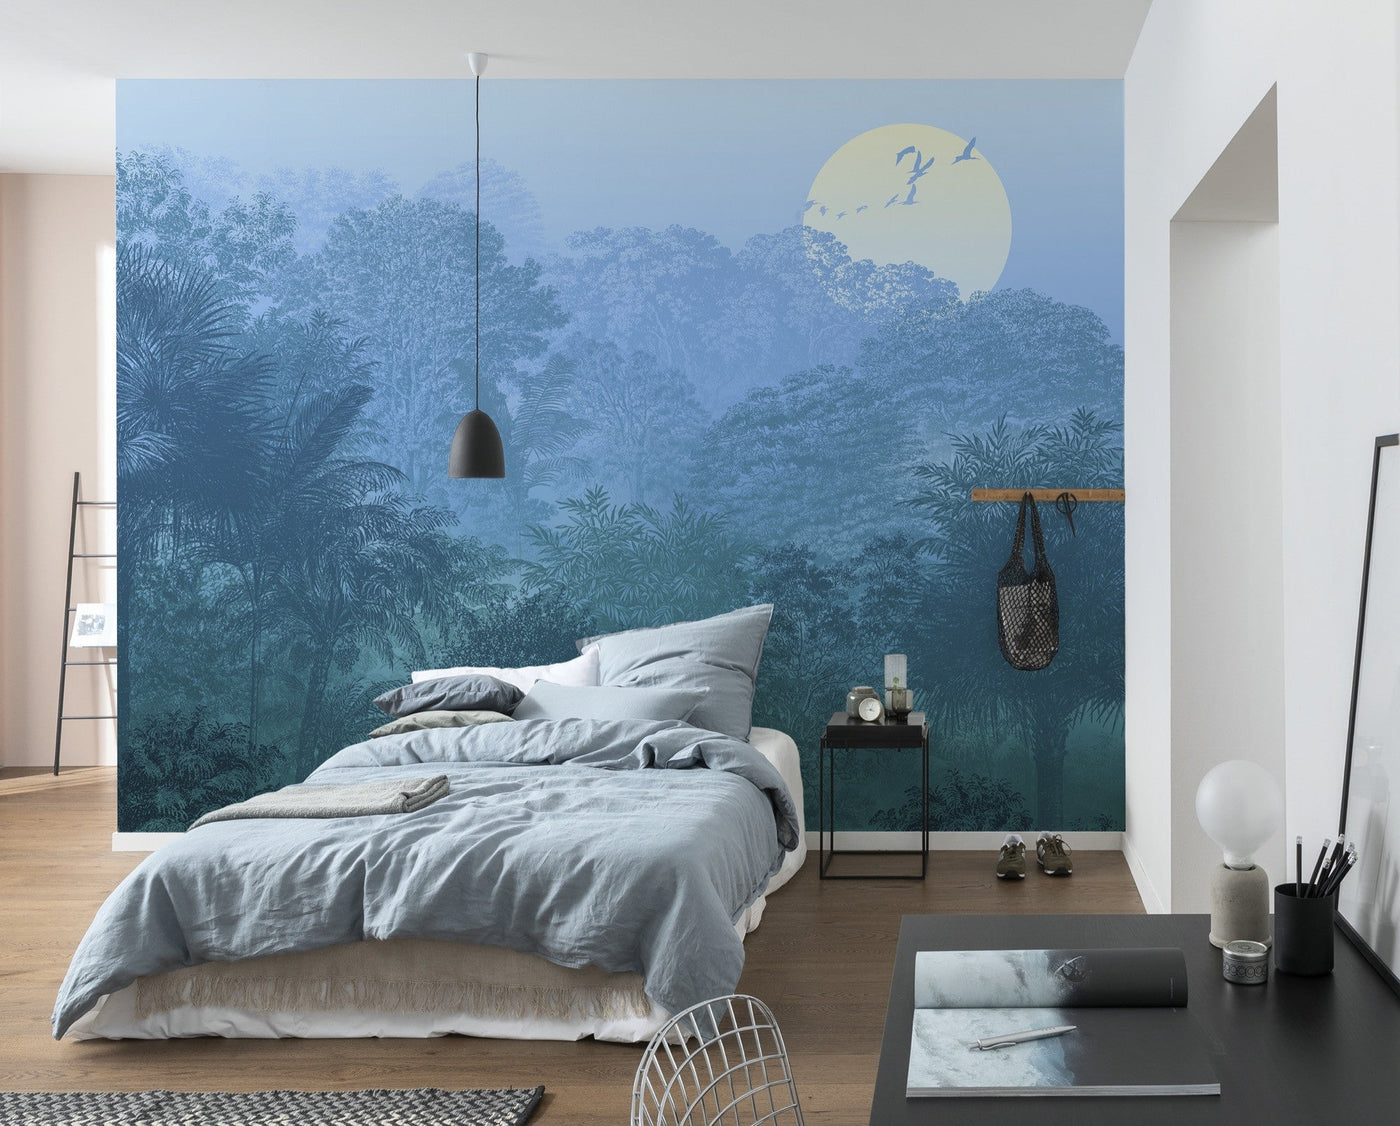 Nocturnal Jungle Mural Wallpaper-Wall Decor-ART WALLPAPER, ECO MURALS, JUNGLE WALLPAPER, LEAF WALLPAPER, MURALS, MURALS / WALLPAPERS, NON-WOVEN WALLPAPER, PALM WALLPAPER-Forest Homes-Nature inspired decor-Nature decor